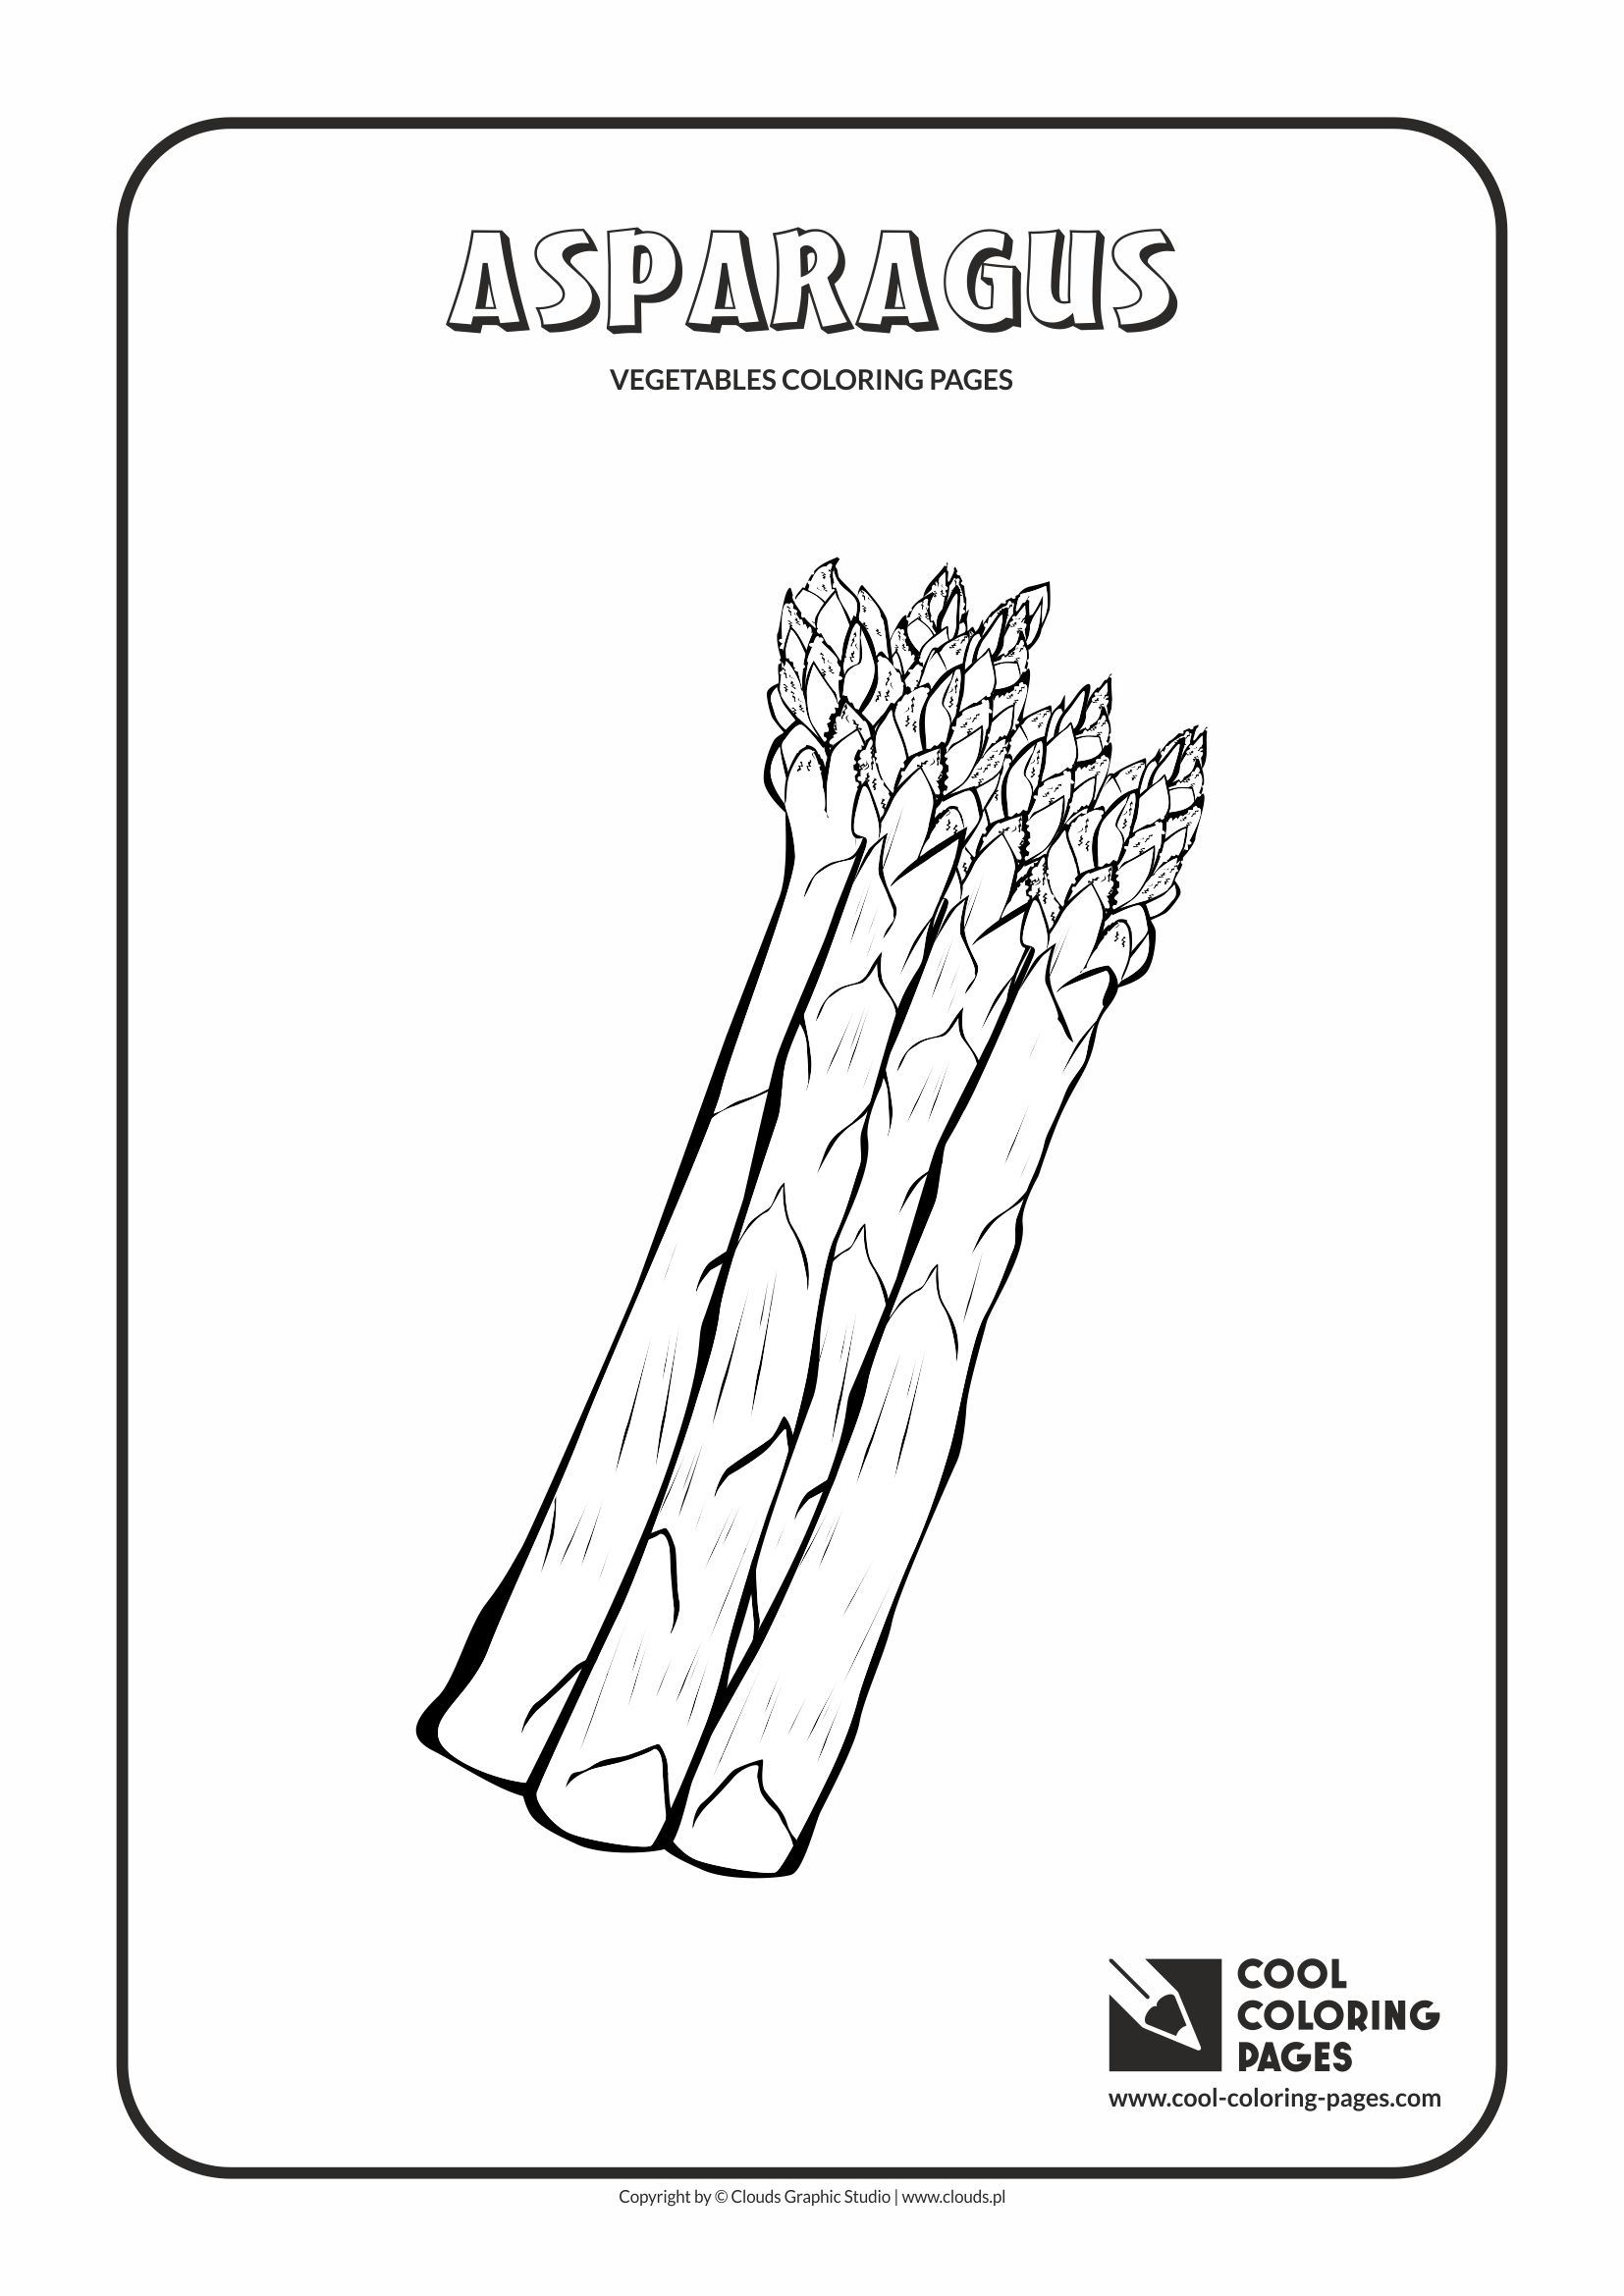 Cool Coloring Pages - Plants / Asparagus / Coloring page with asparagus